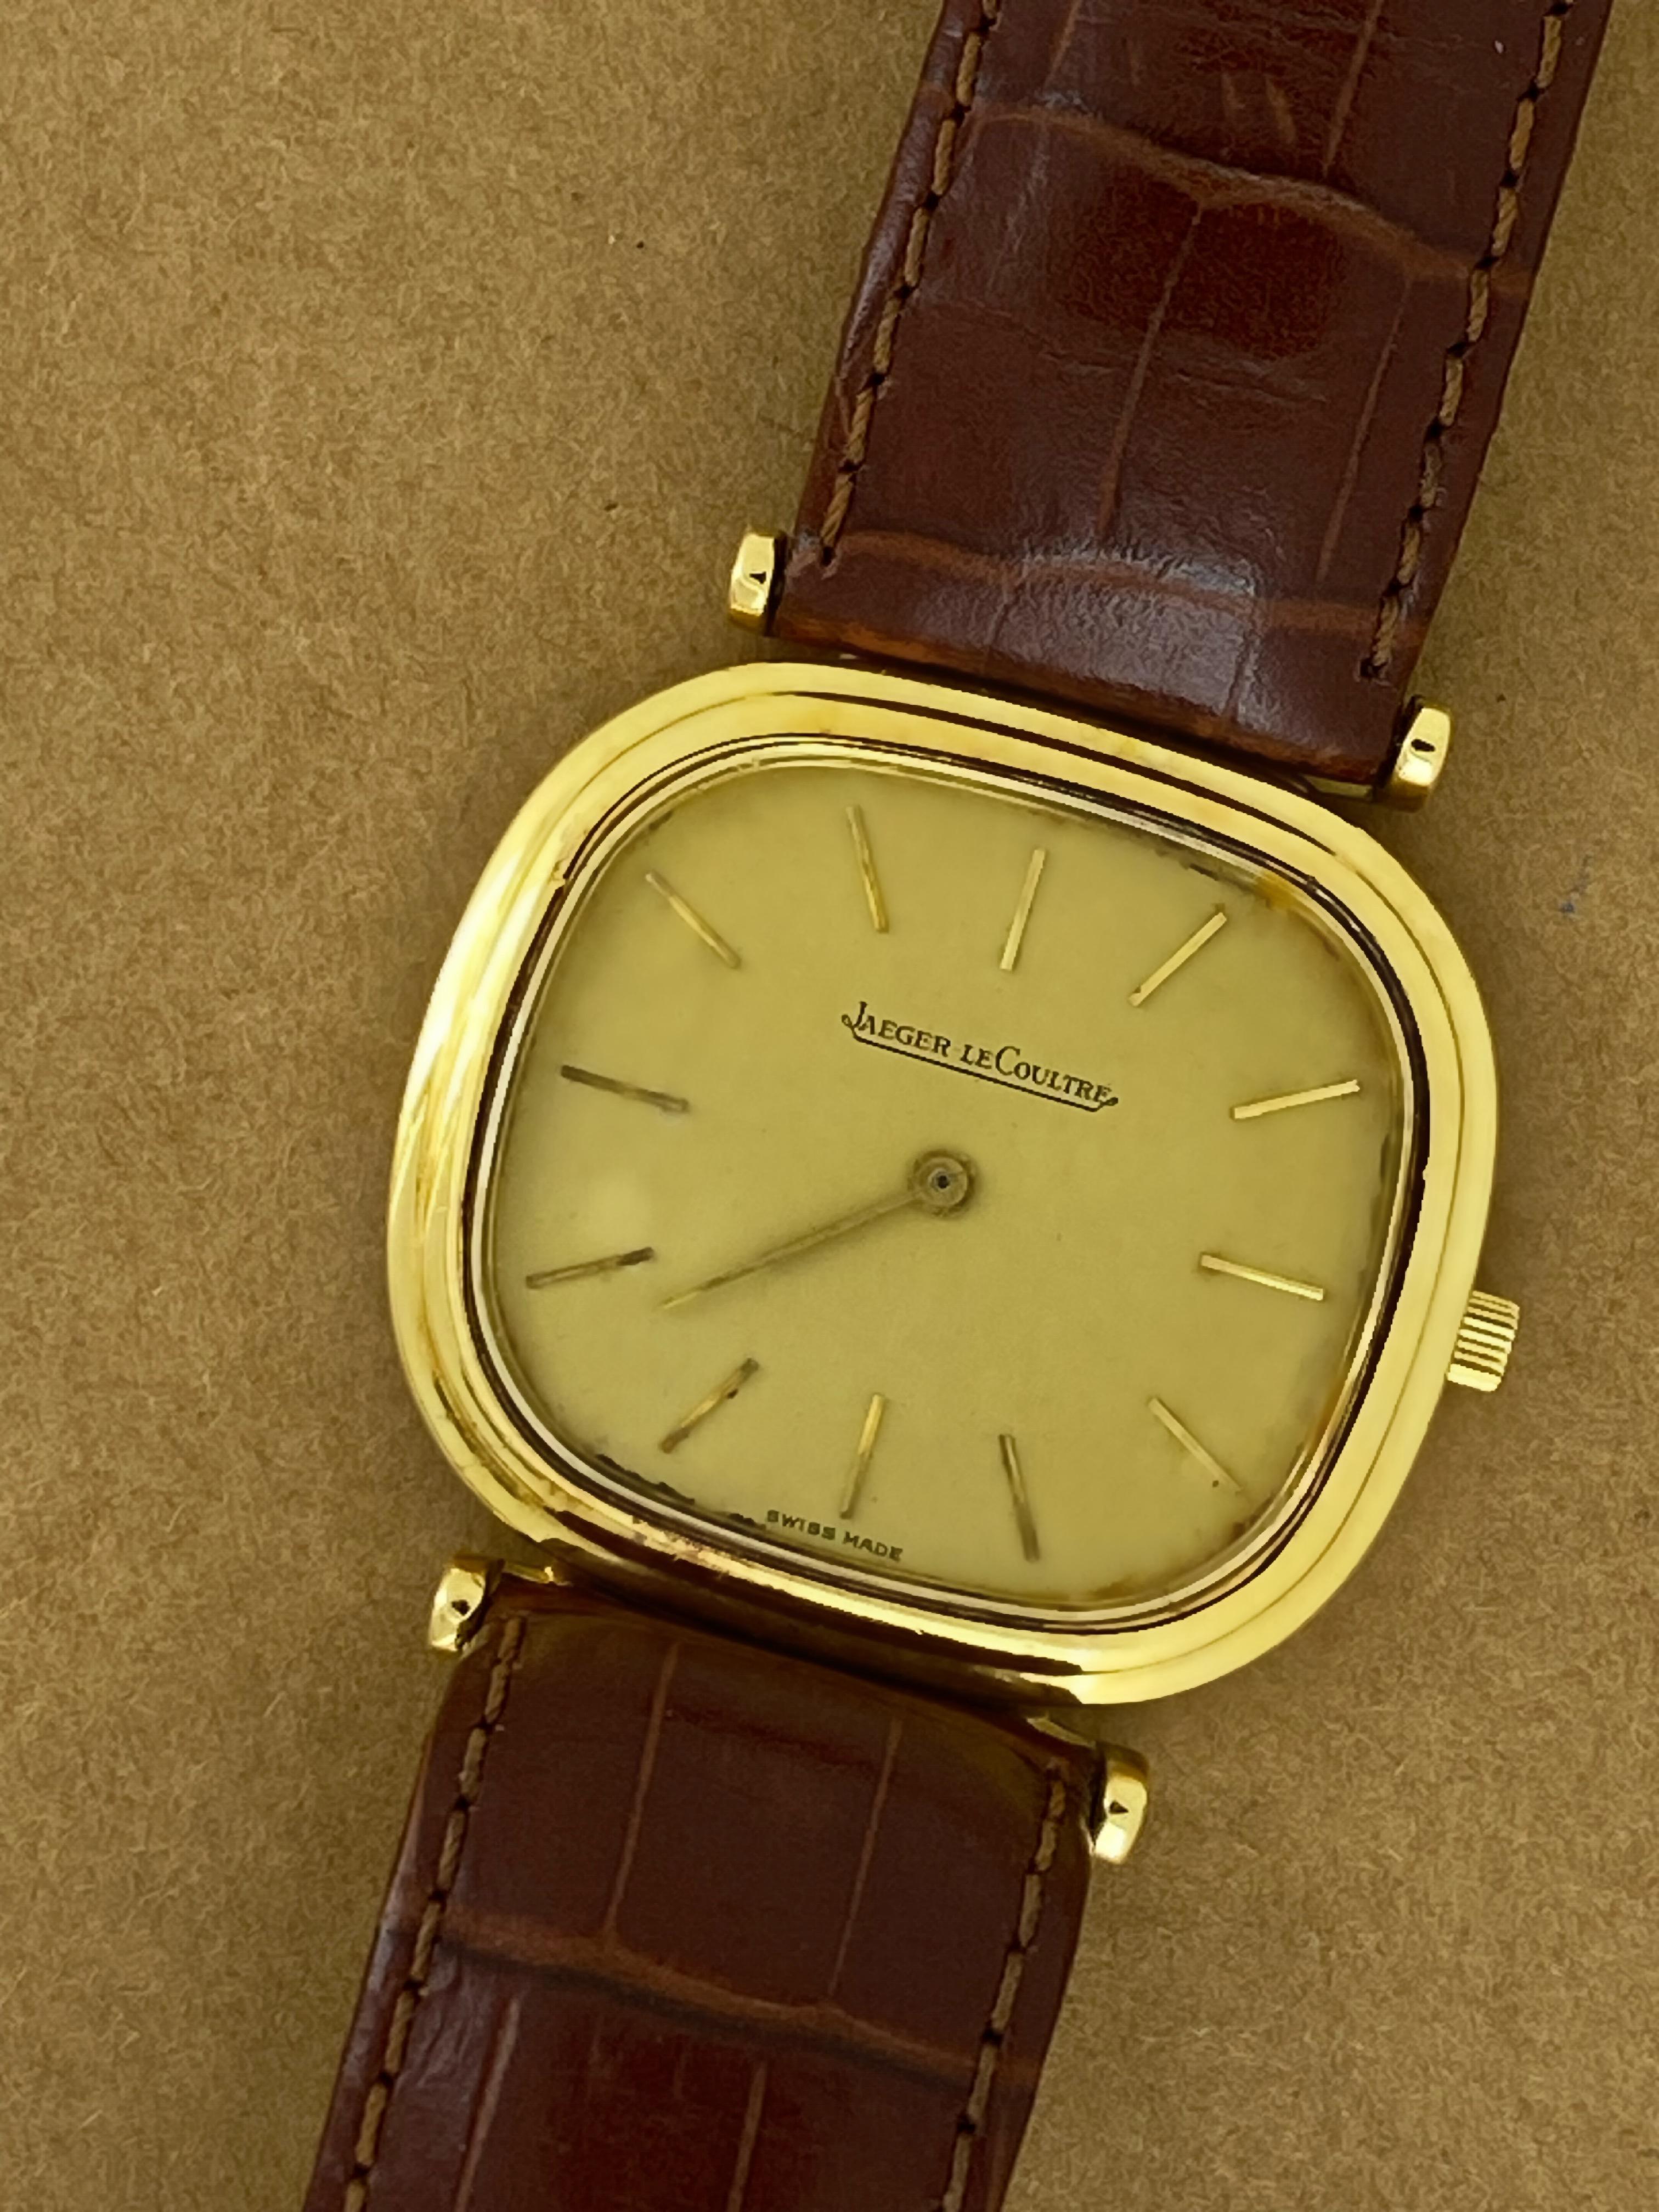 18K Gold Jaeger Le-Coultre ref 9132 Cushion Case Manual 17 jewels Cal 818 Watch For Sale 1